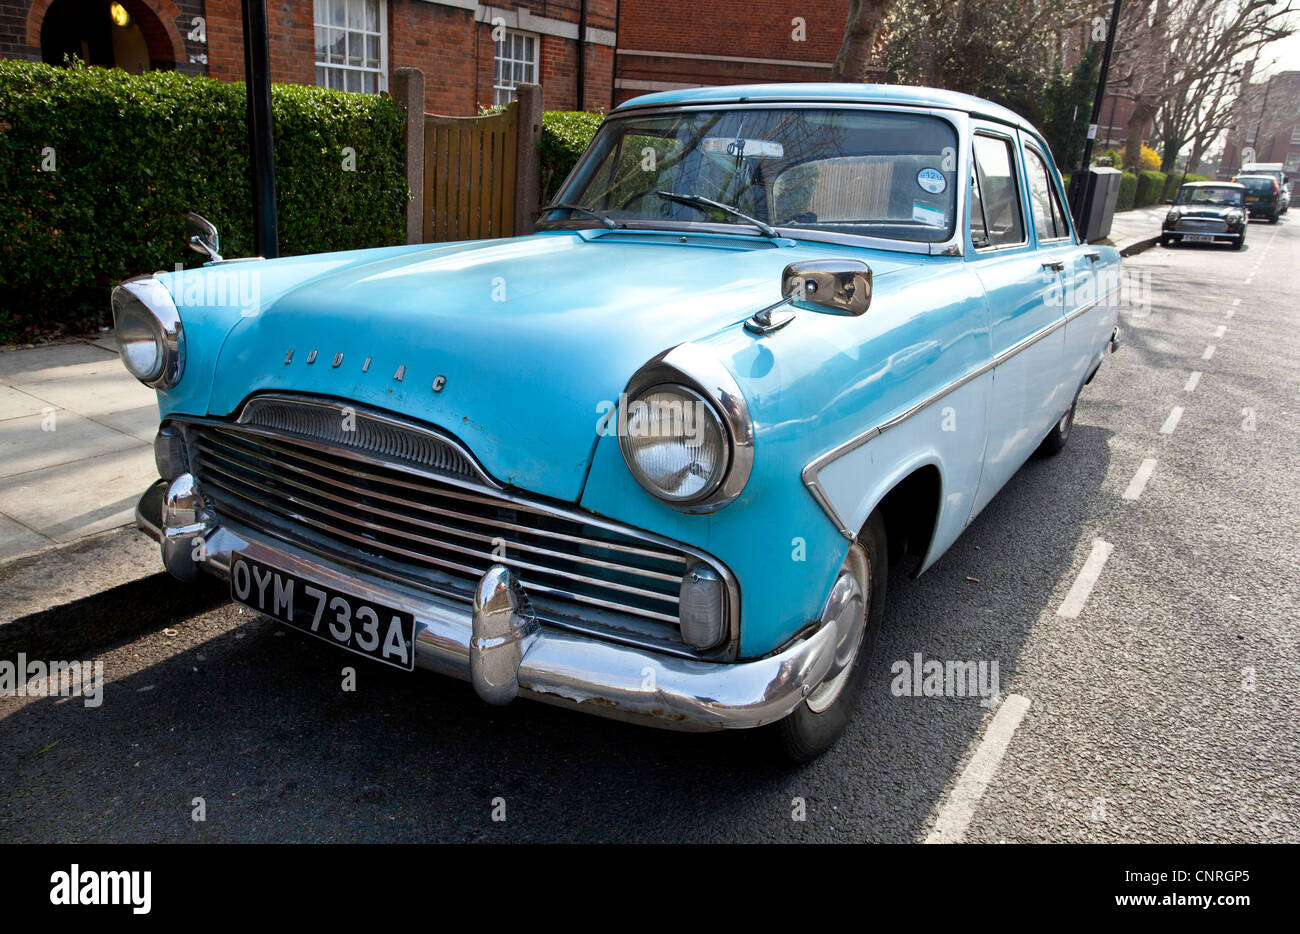 Front view of a Ford Zephyr Zodiac car parked on the street, London, England, UK Stock Photo